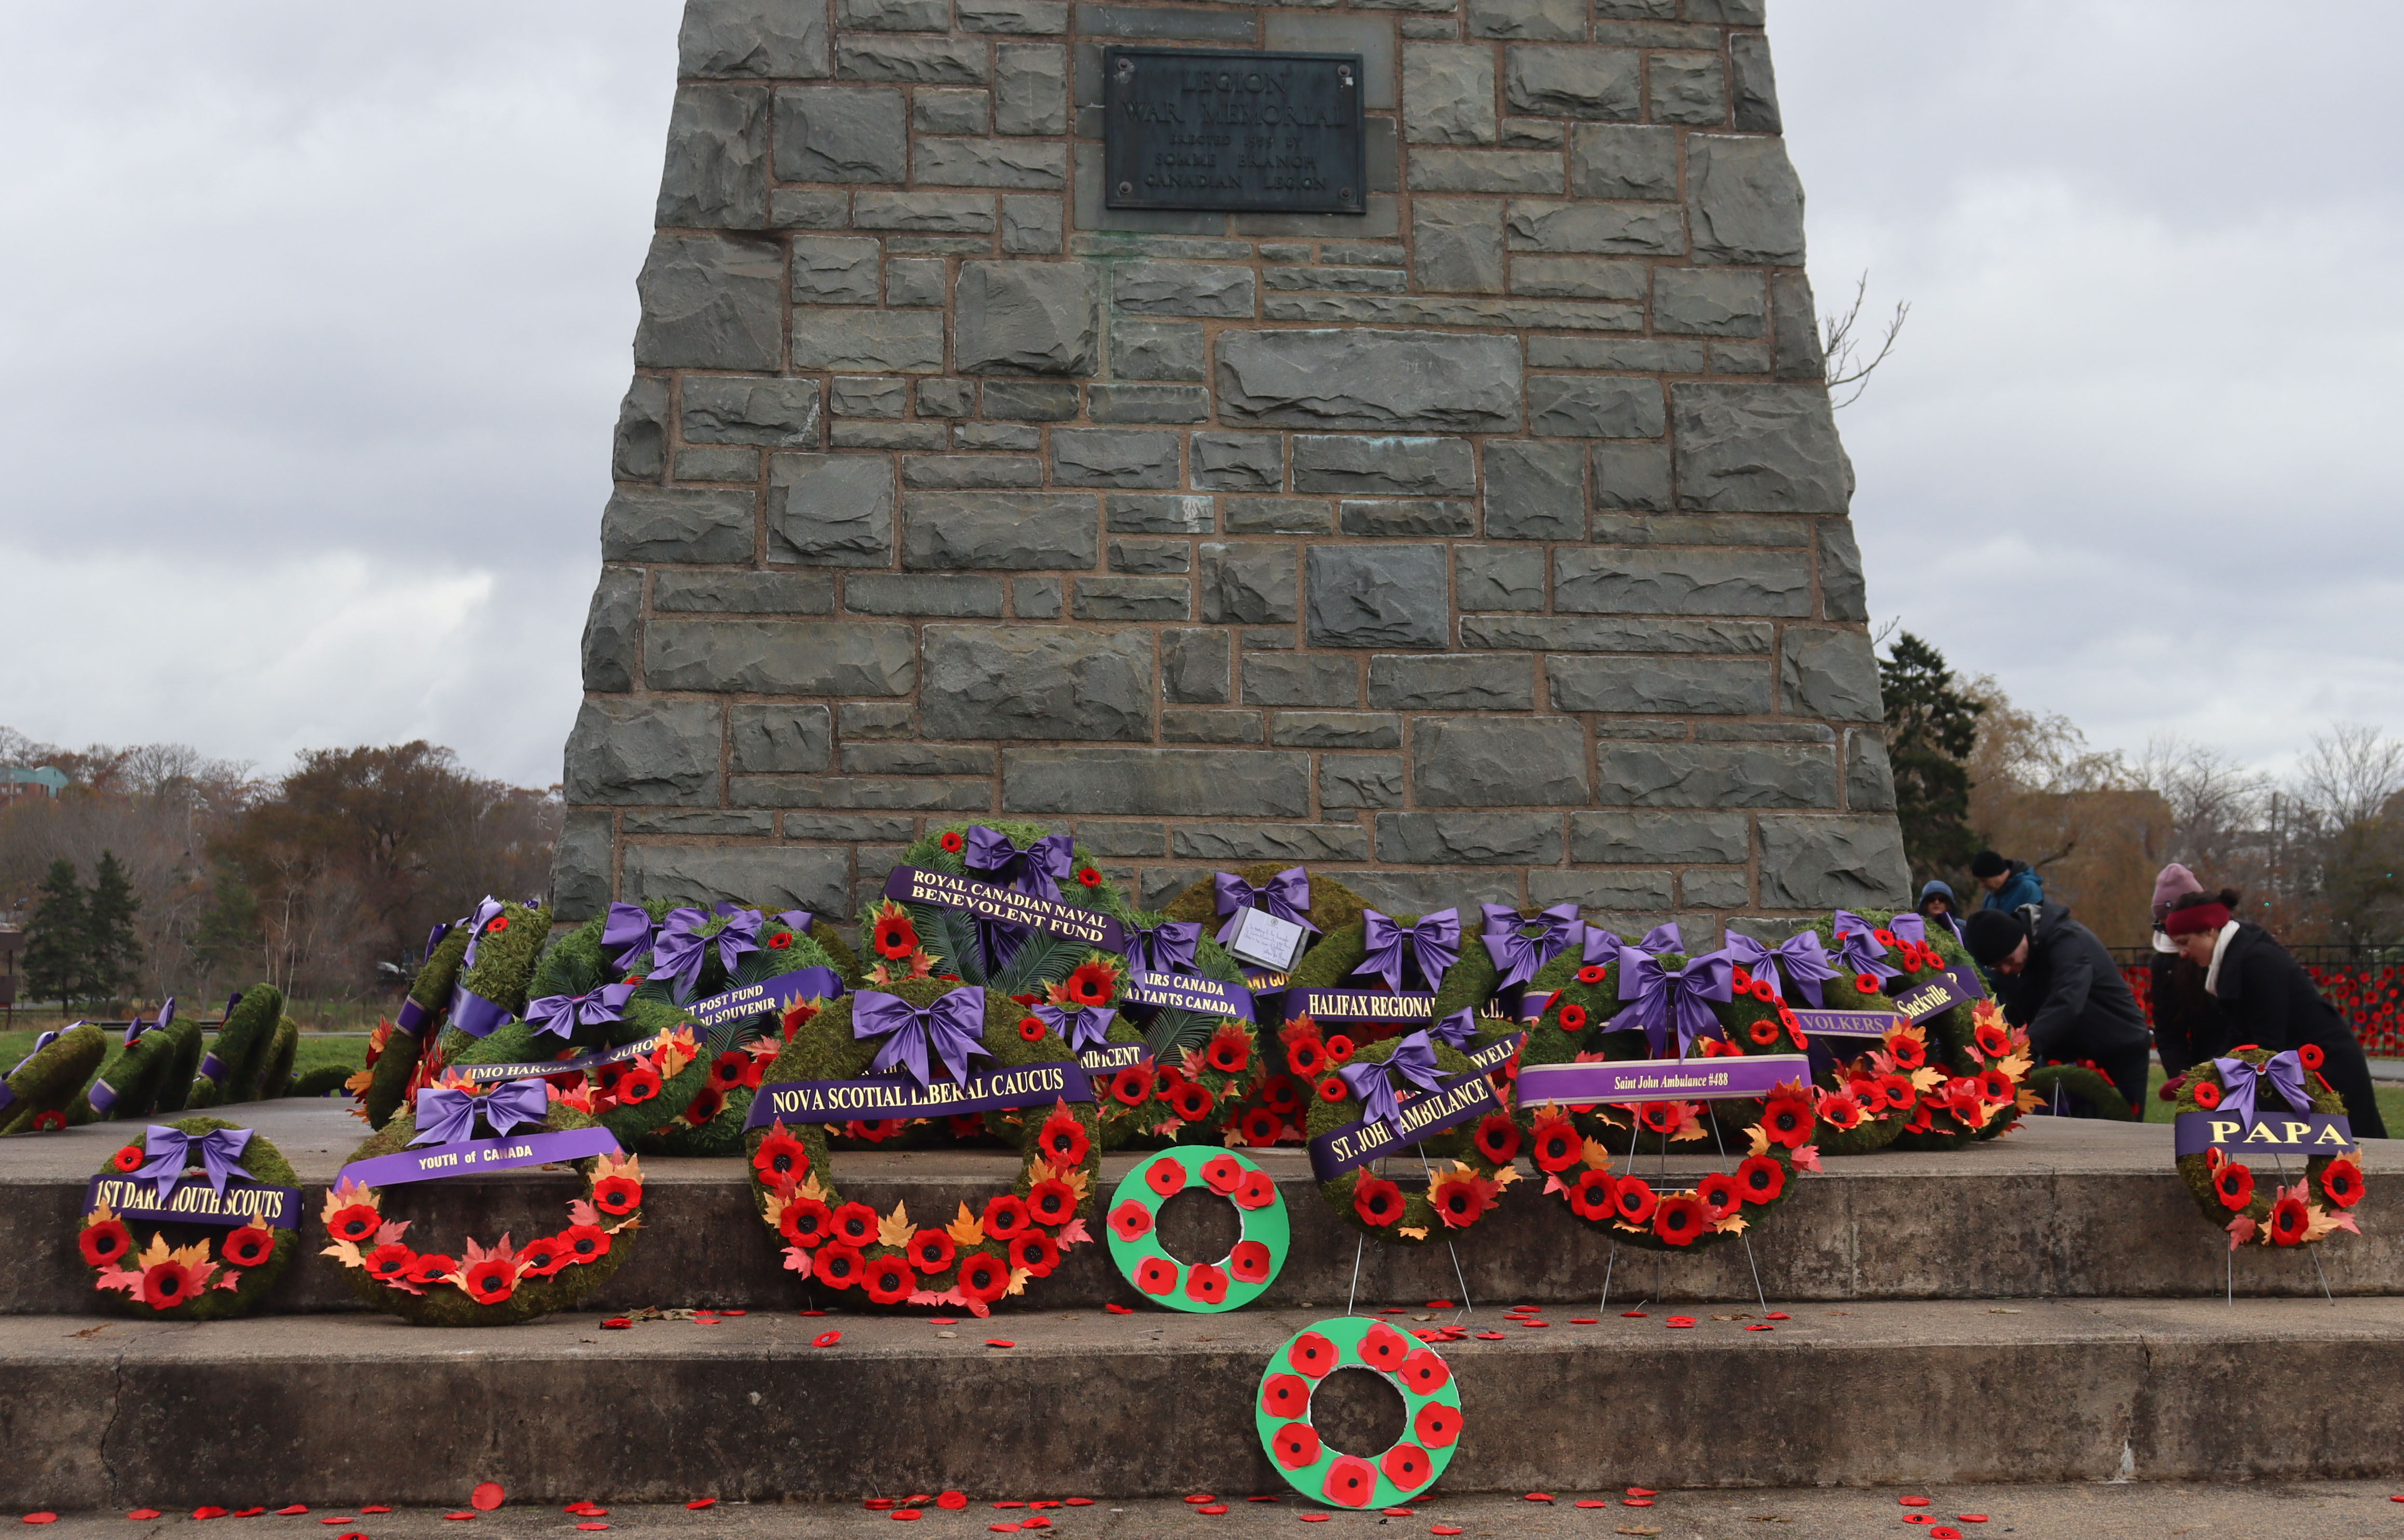 All wreaths have been placed at the cenotaph in Sullivan's Pond.